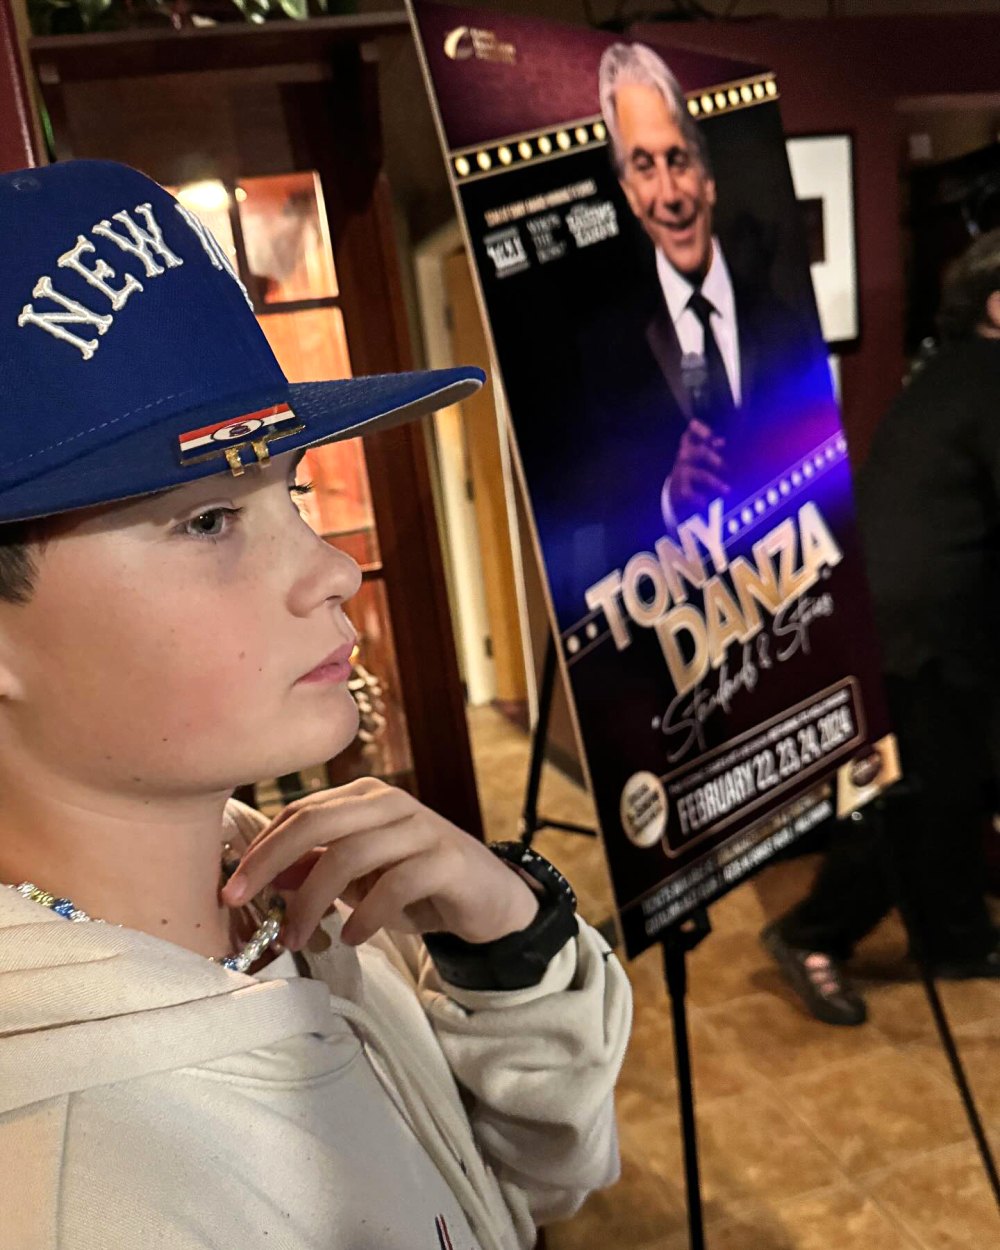 Alyssa Milano takes her son to see 'TV Dad' Tony Danza: 'Tonight was very special for me'